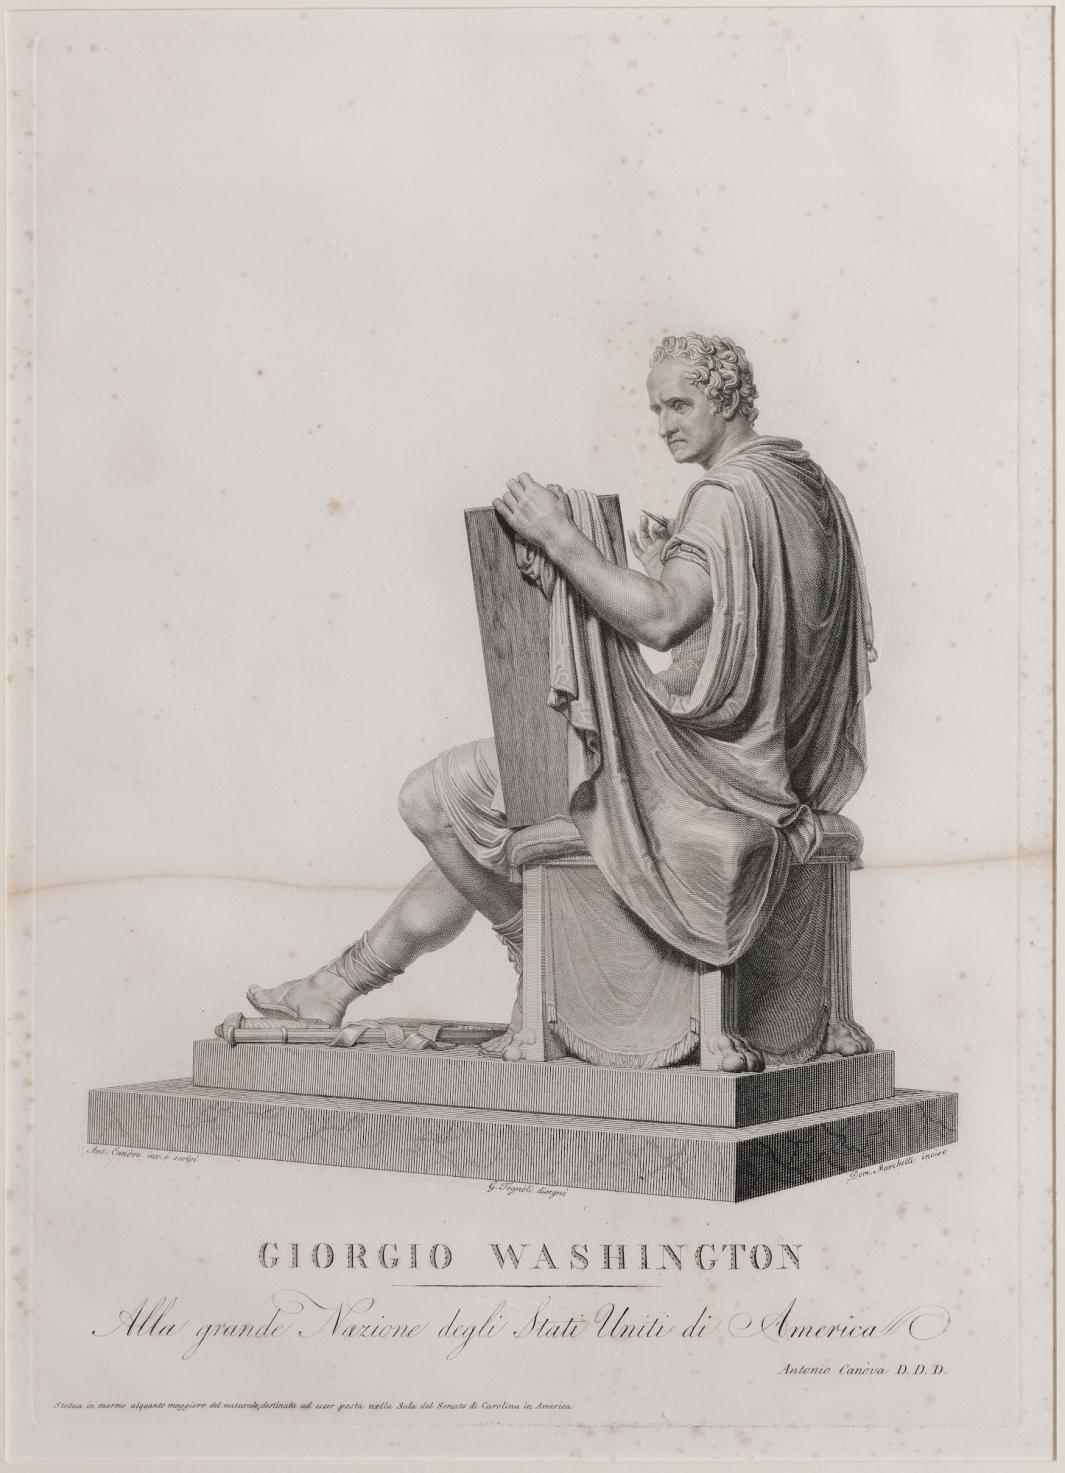 etching and engraving of seated George Washington holding large tablet